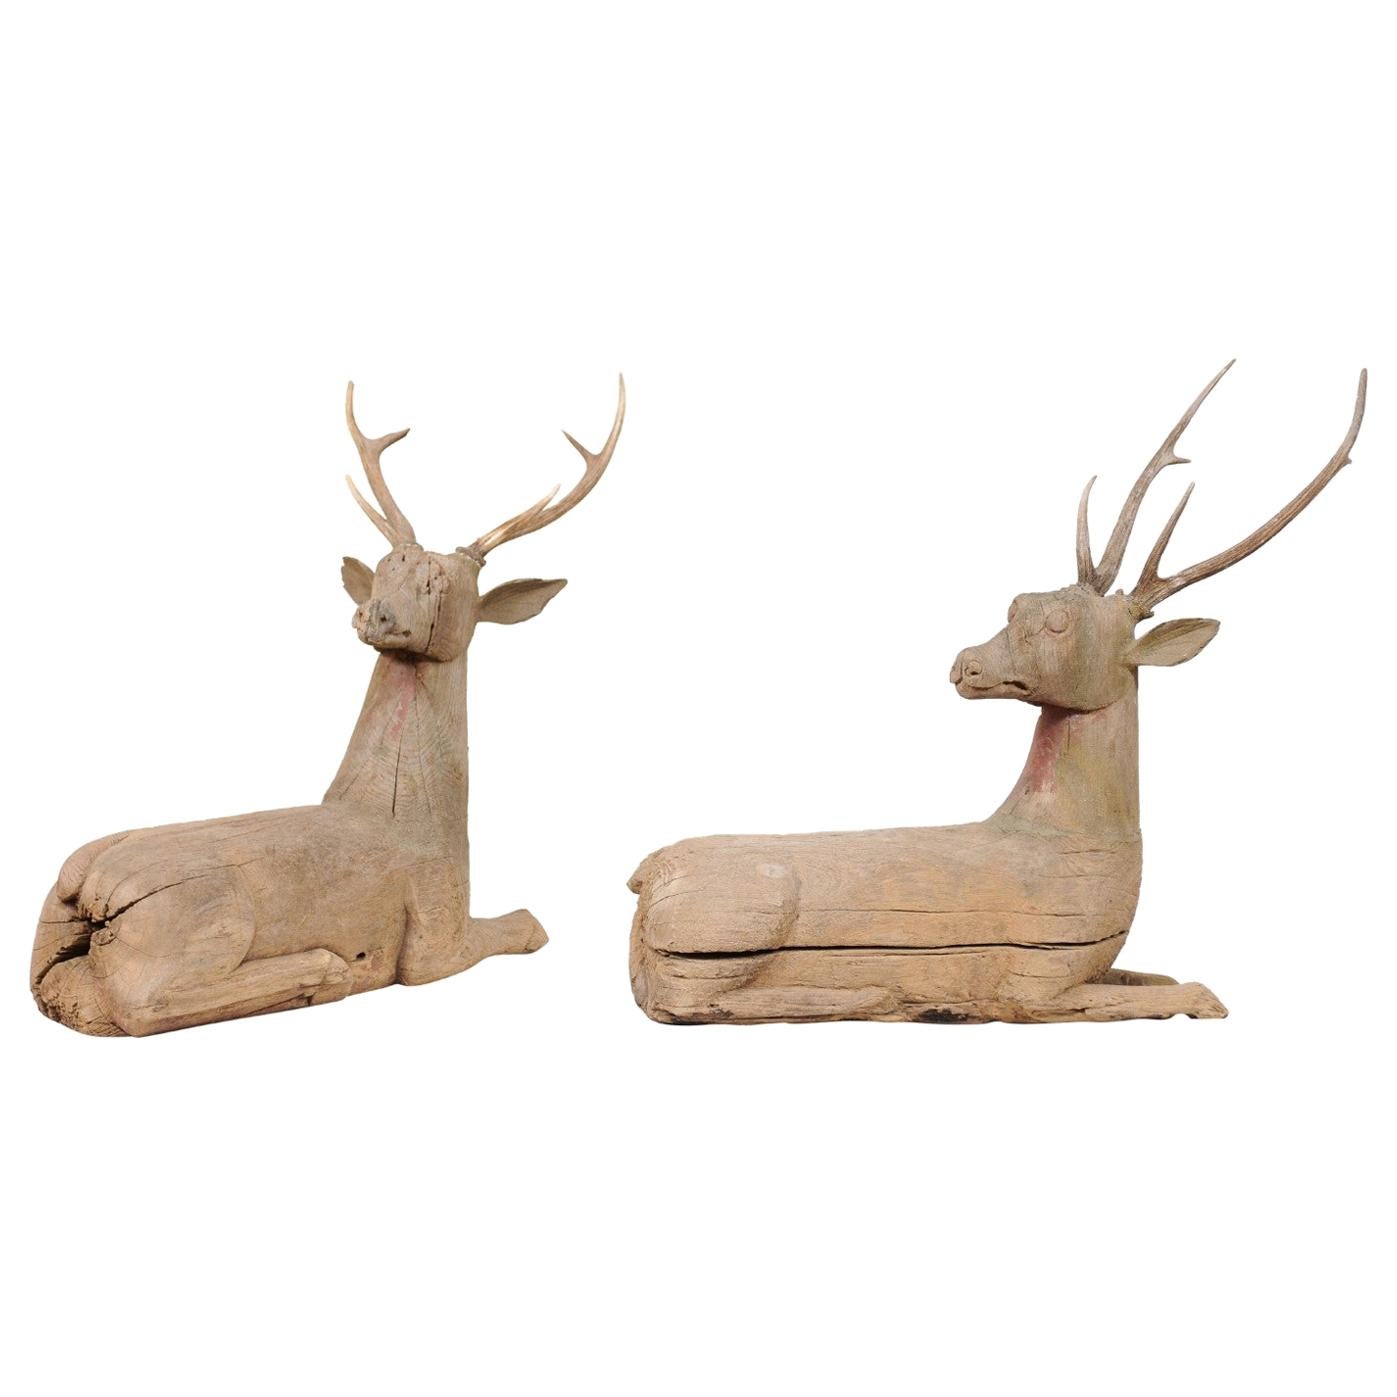 Fabulous Pair of 19th C. British Colonial Hand Carved Wood Deer with Antlers